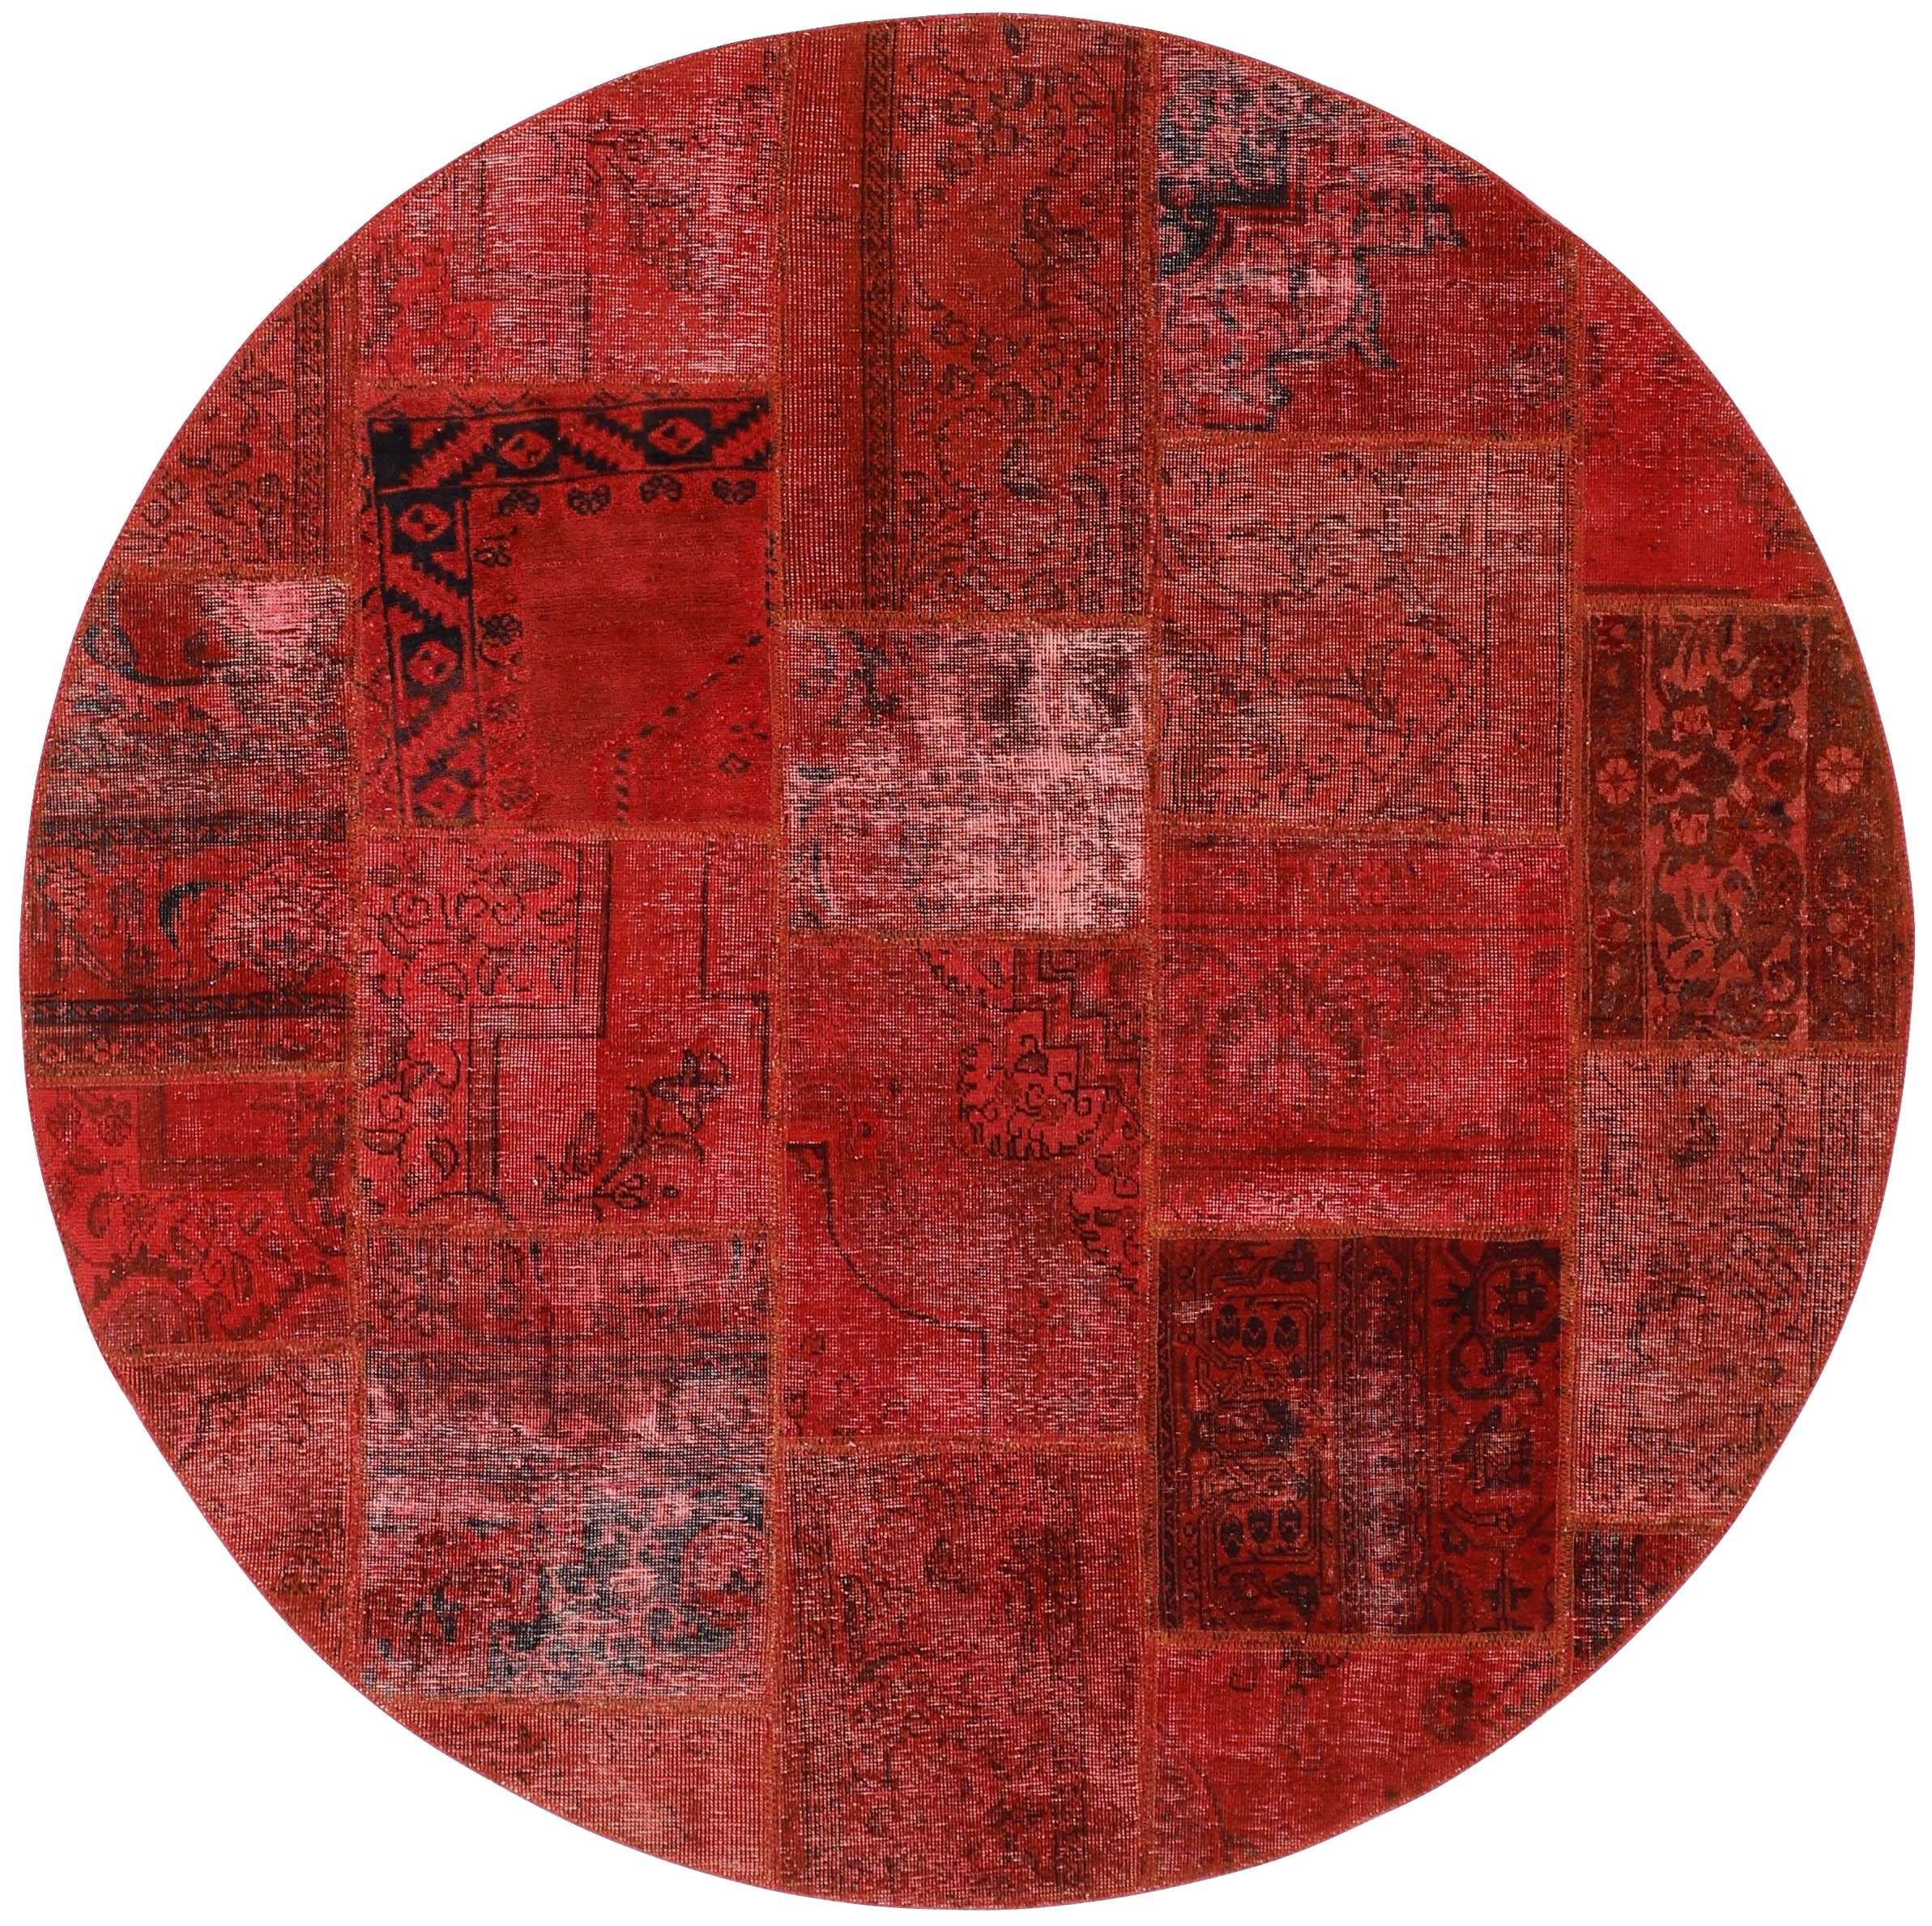 Authentic red patchwork persian circle rug